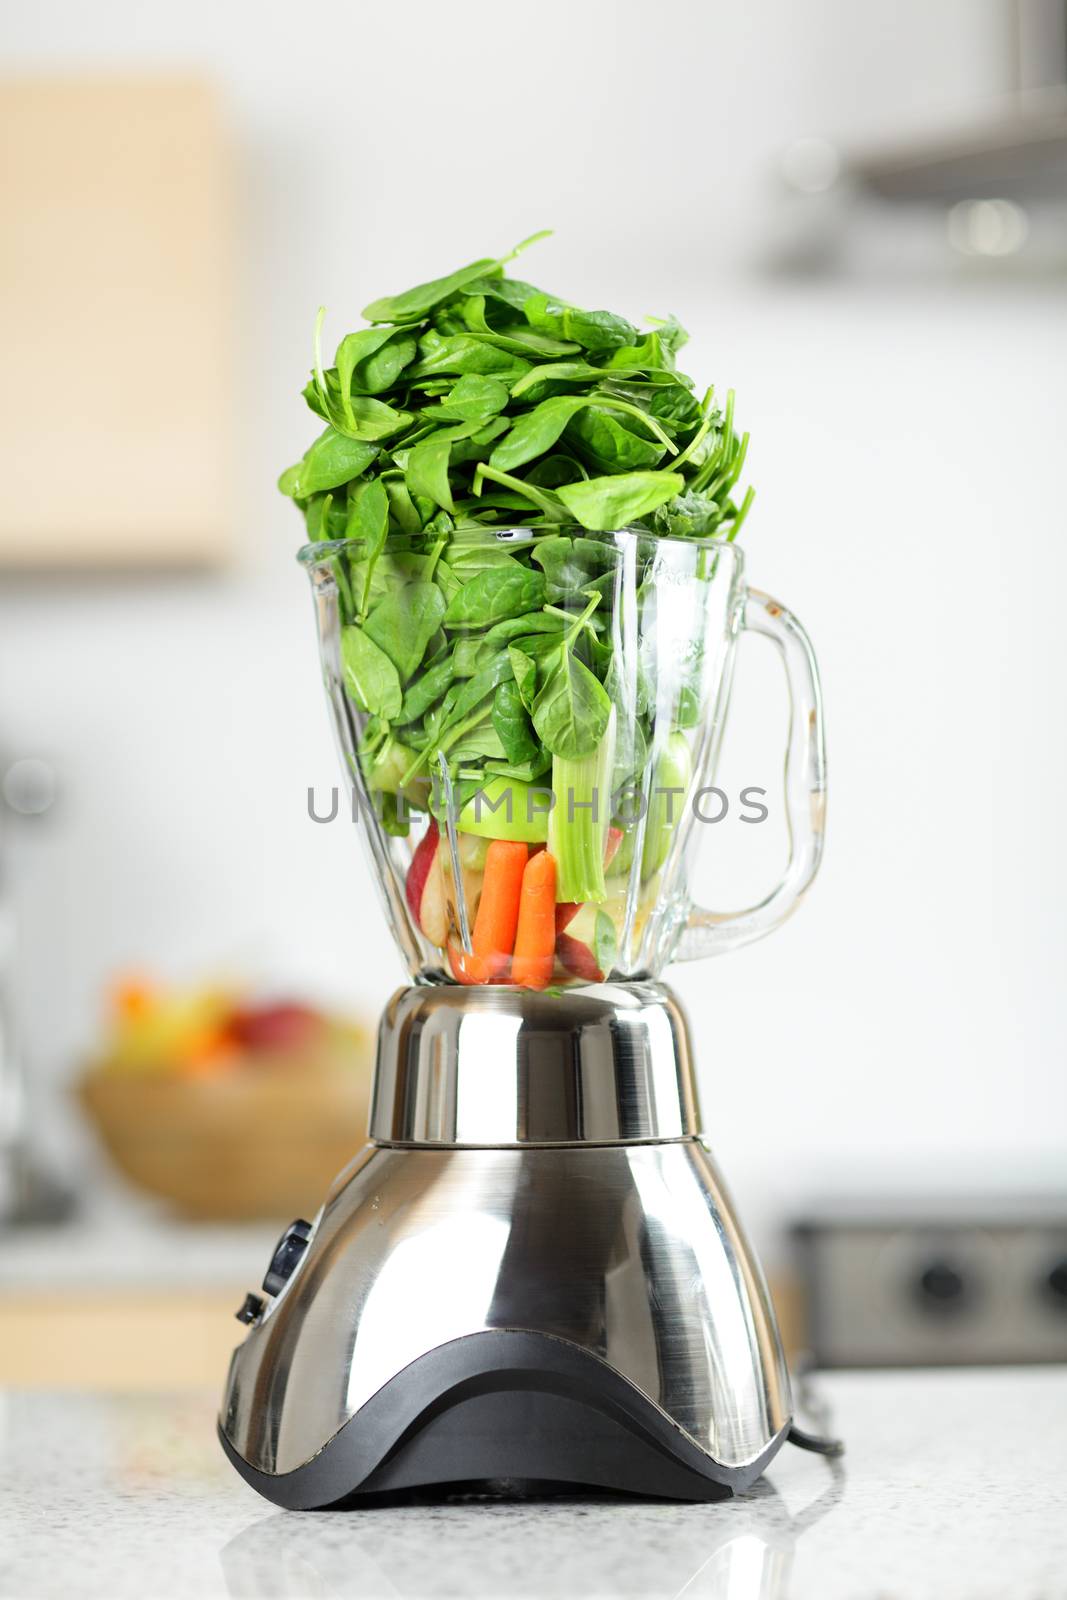 Green vegetable smoothie in blender. Healthy food concept with spinach, celery, carrot etc vegetables smoothies ready in blender in kitchen at home.